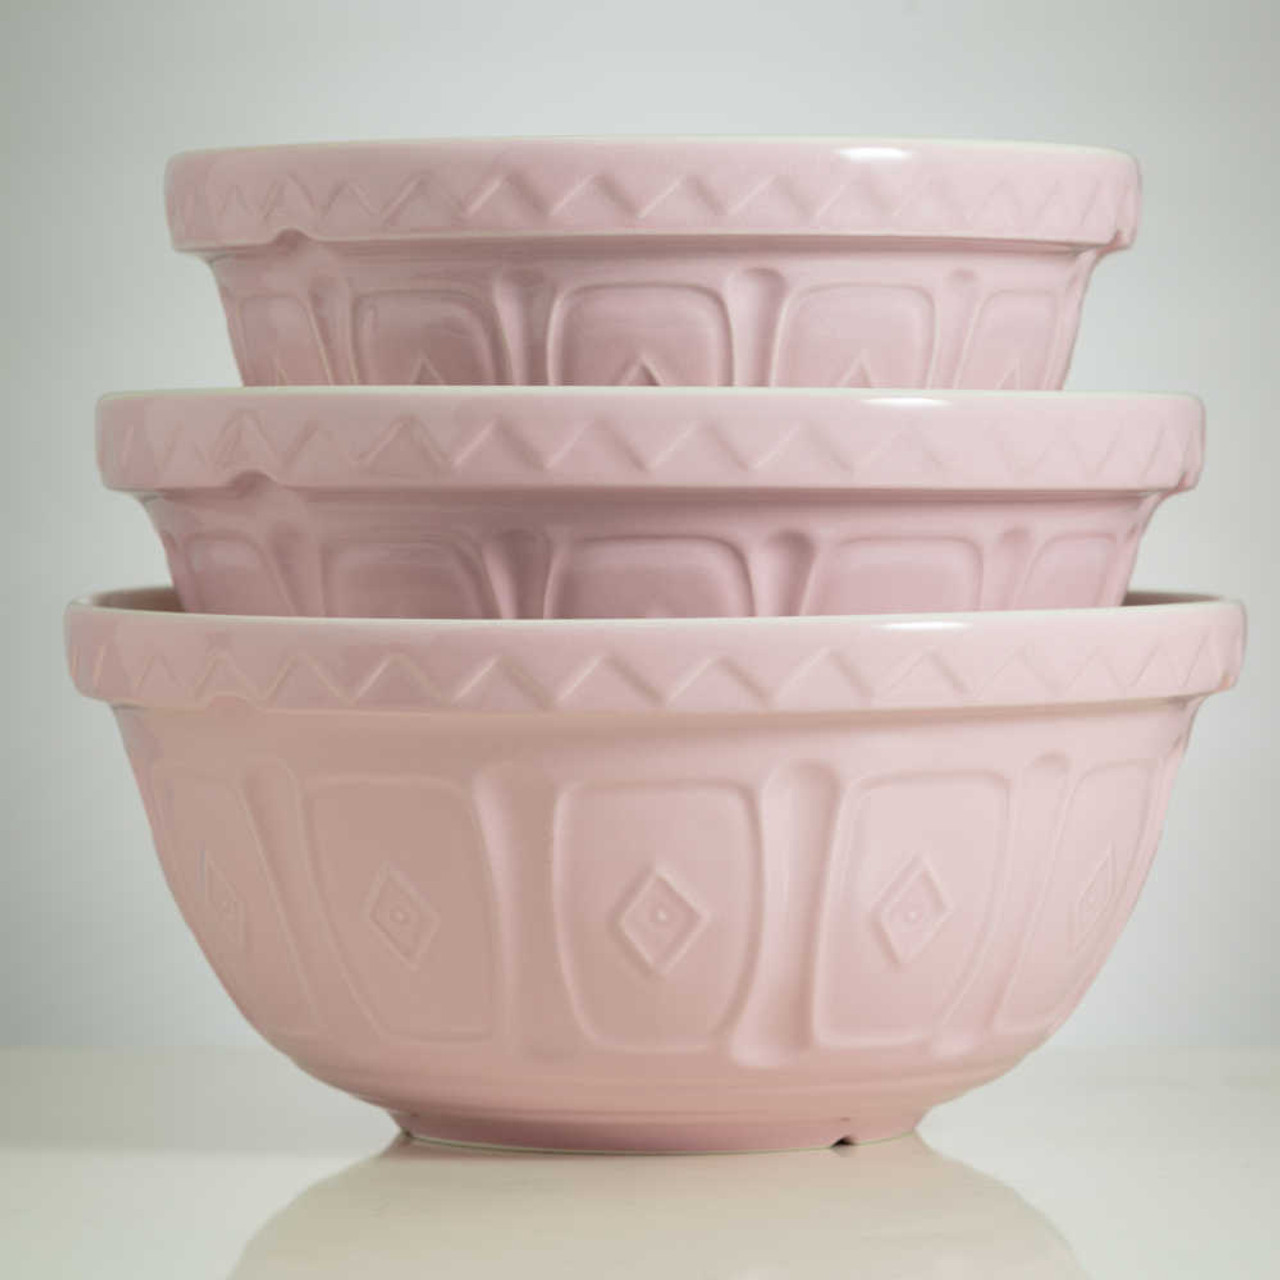 https://cdn11.bigcommerce.com/s-hccytny0od/images/stencil/1280x1280/products/5264/22717/Mason_Cash_Color_Mix_Powder_Pink_Mixing_Bowl_3__28296.1676322295.jpg?c=2?imbypass=on